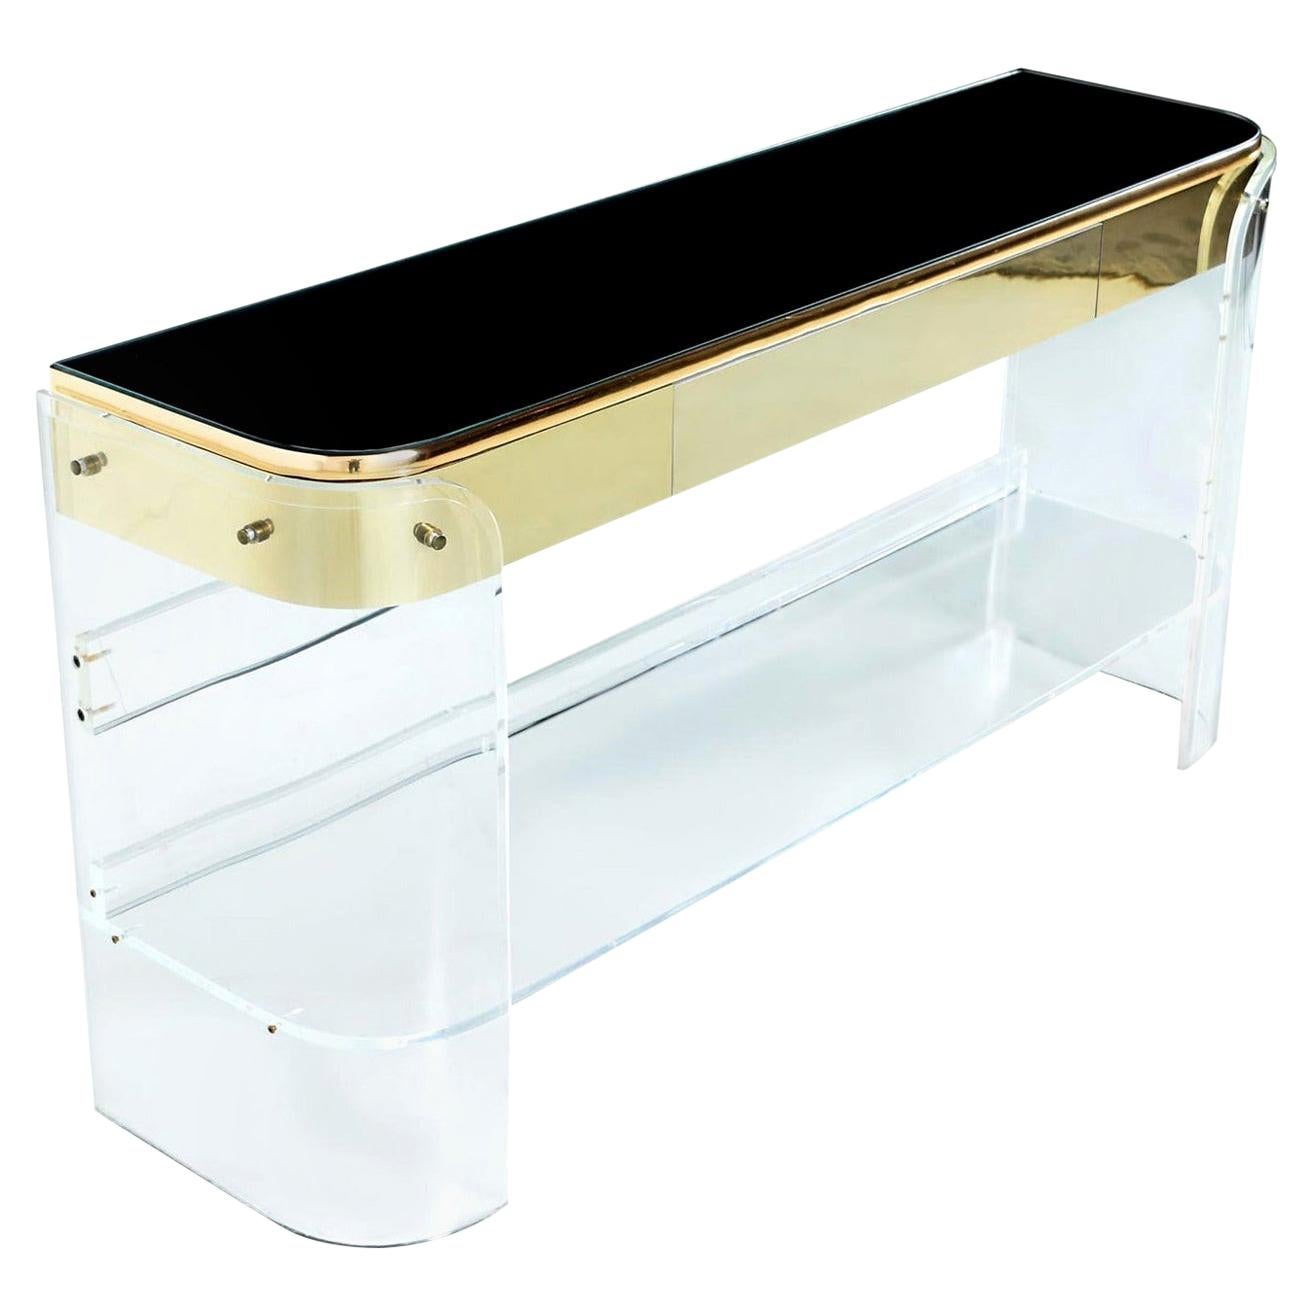 Vintage 1970s Hollywood Regency Gold Brass Lucite Acrylic Console Sofa Table